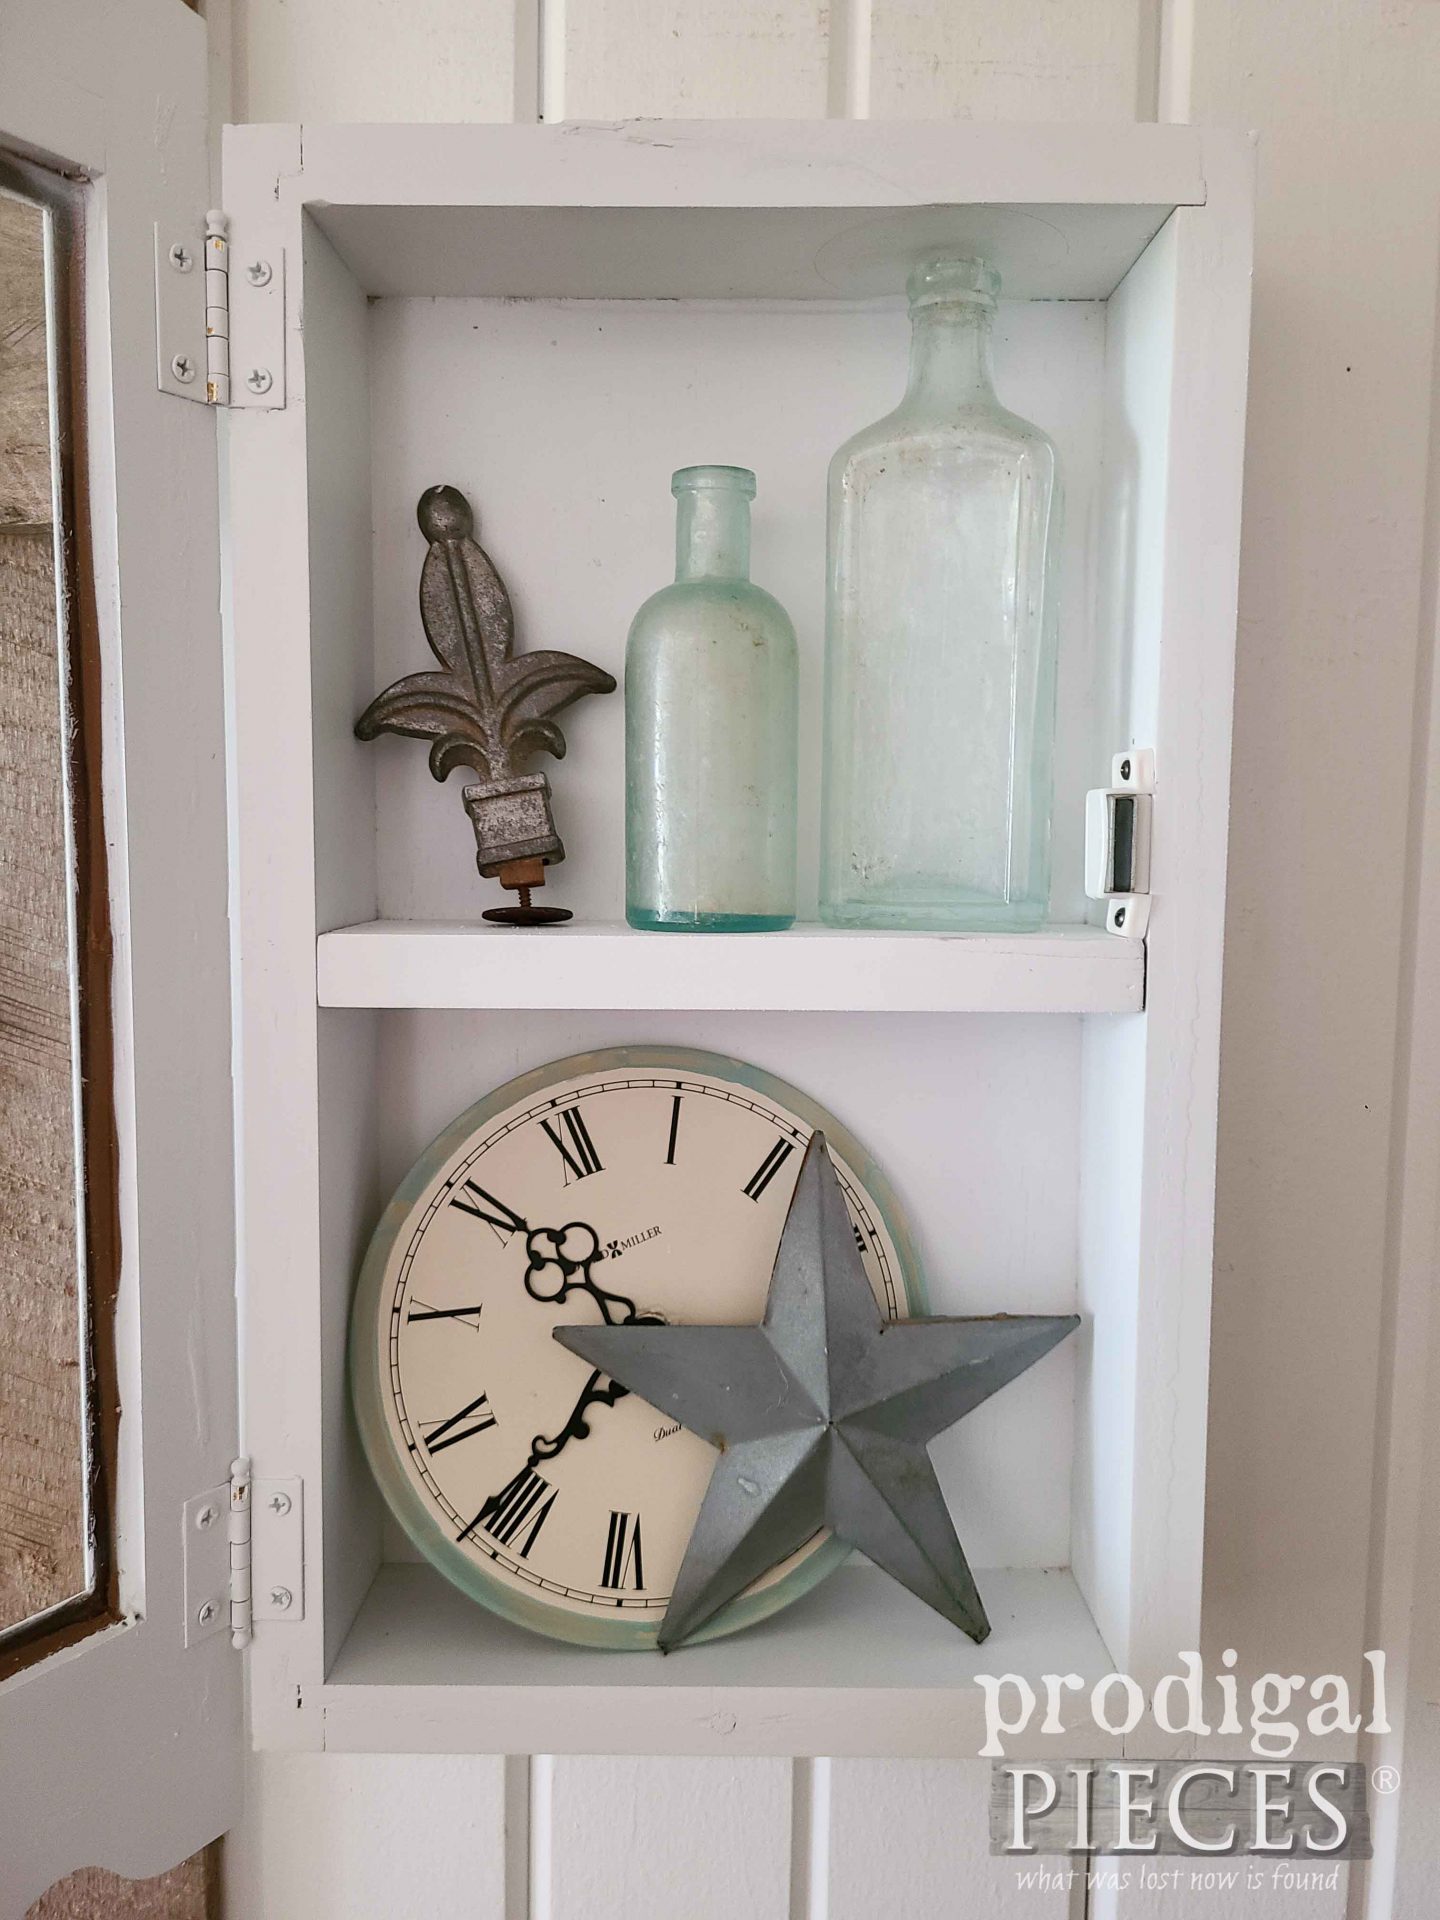 Open Reclaimed Wall Clock Cabinet Door by Larissa of Prodigal Pieces | prodigalpieces.com #prodigalpieces #homedecor #diy #salvaged